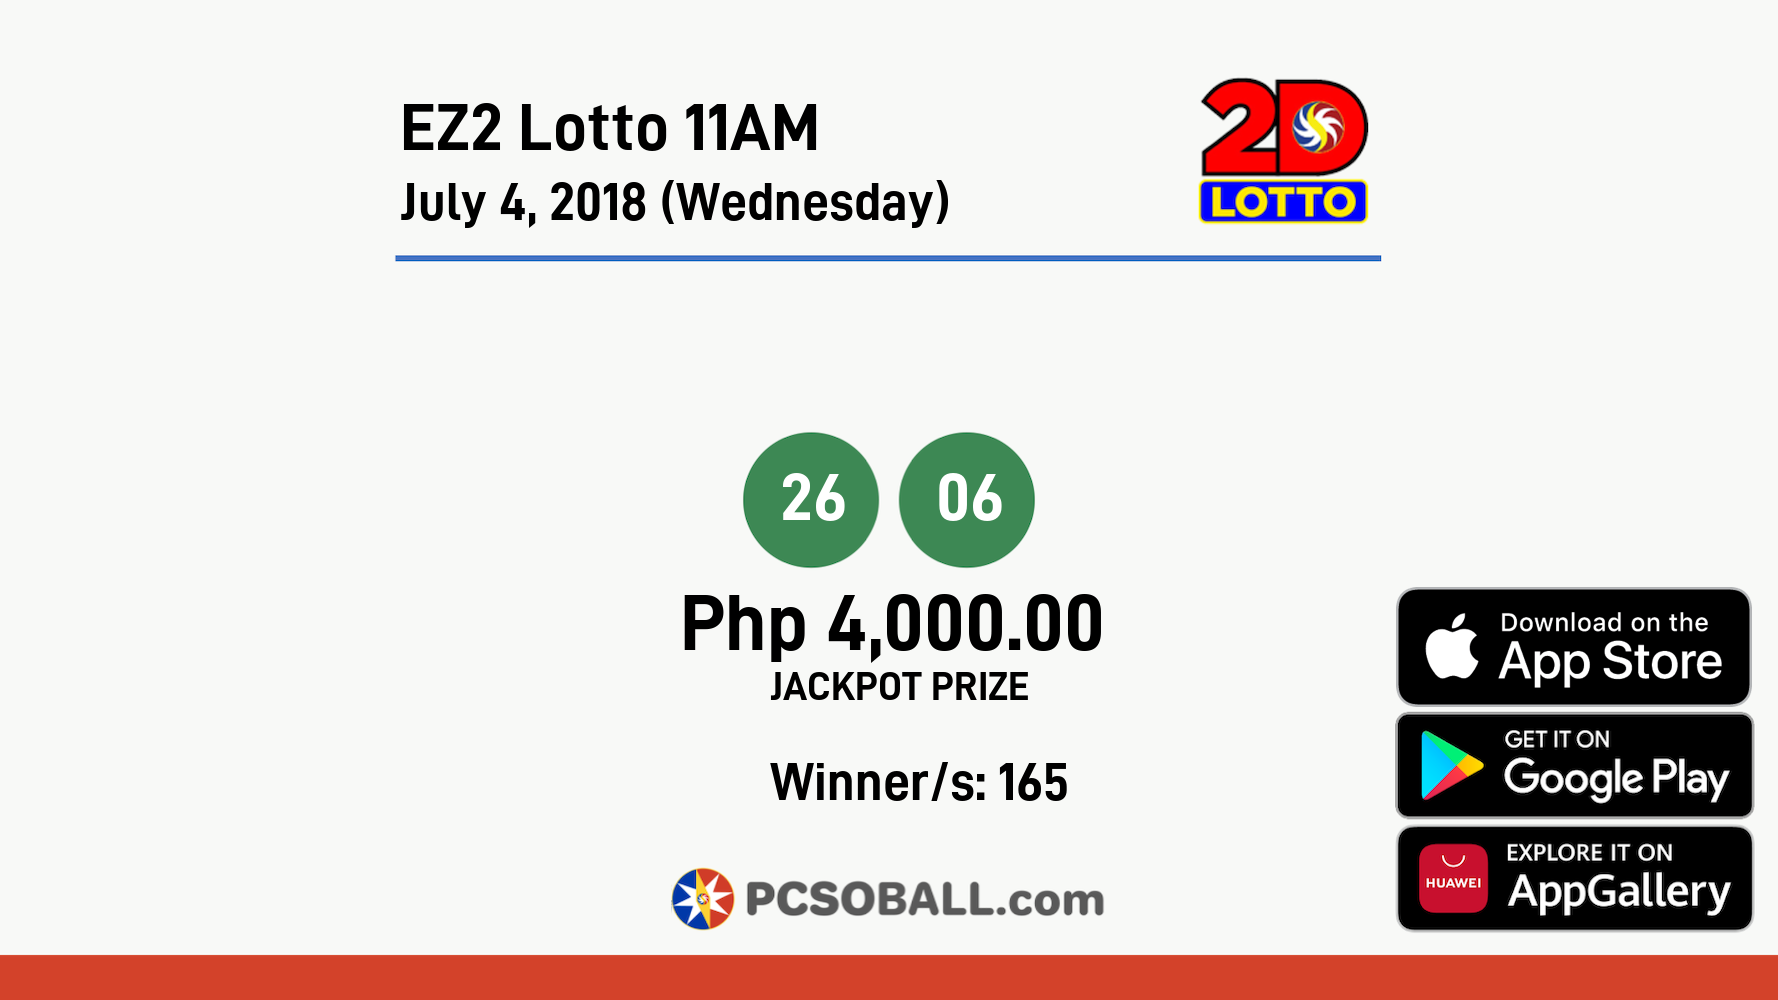 EZ2 Lotto 11AM July 4, 2018 (Wednesday) Result